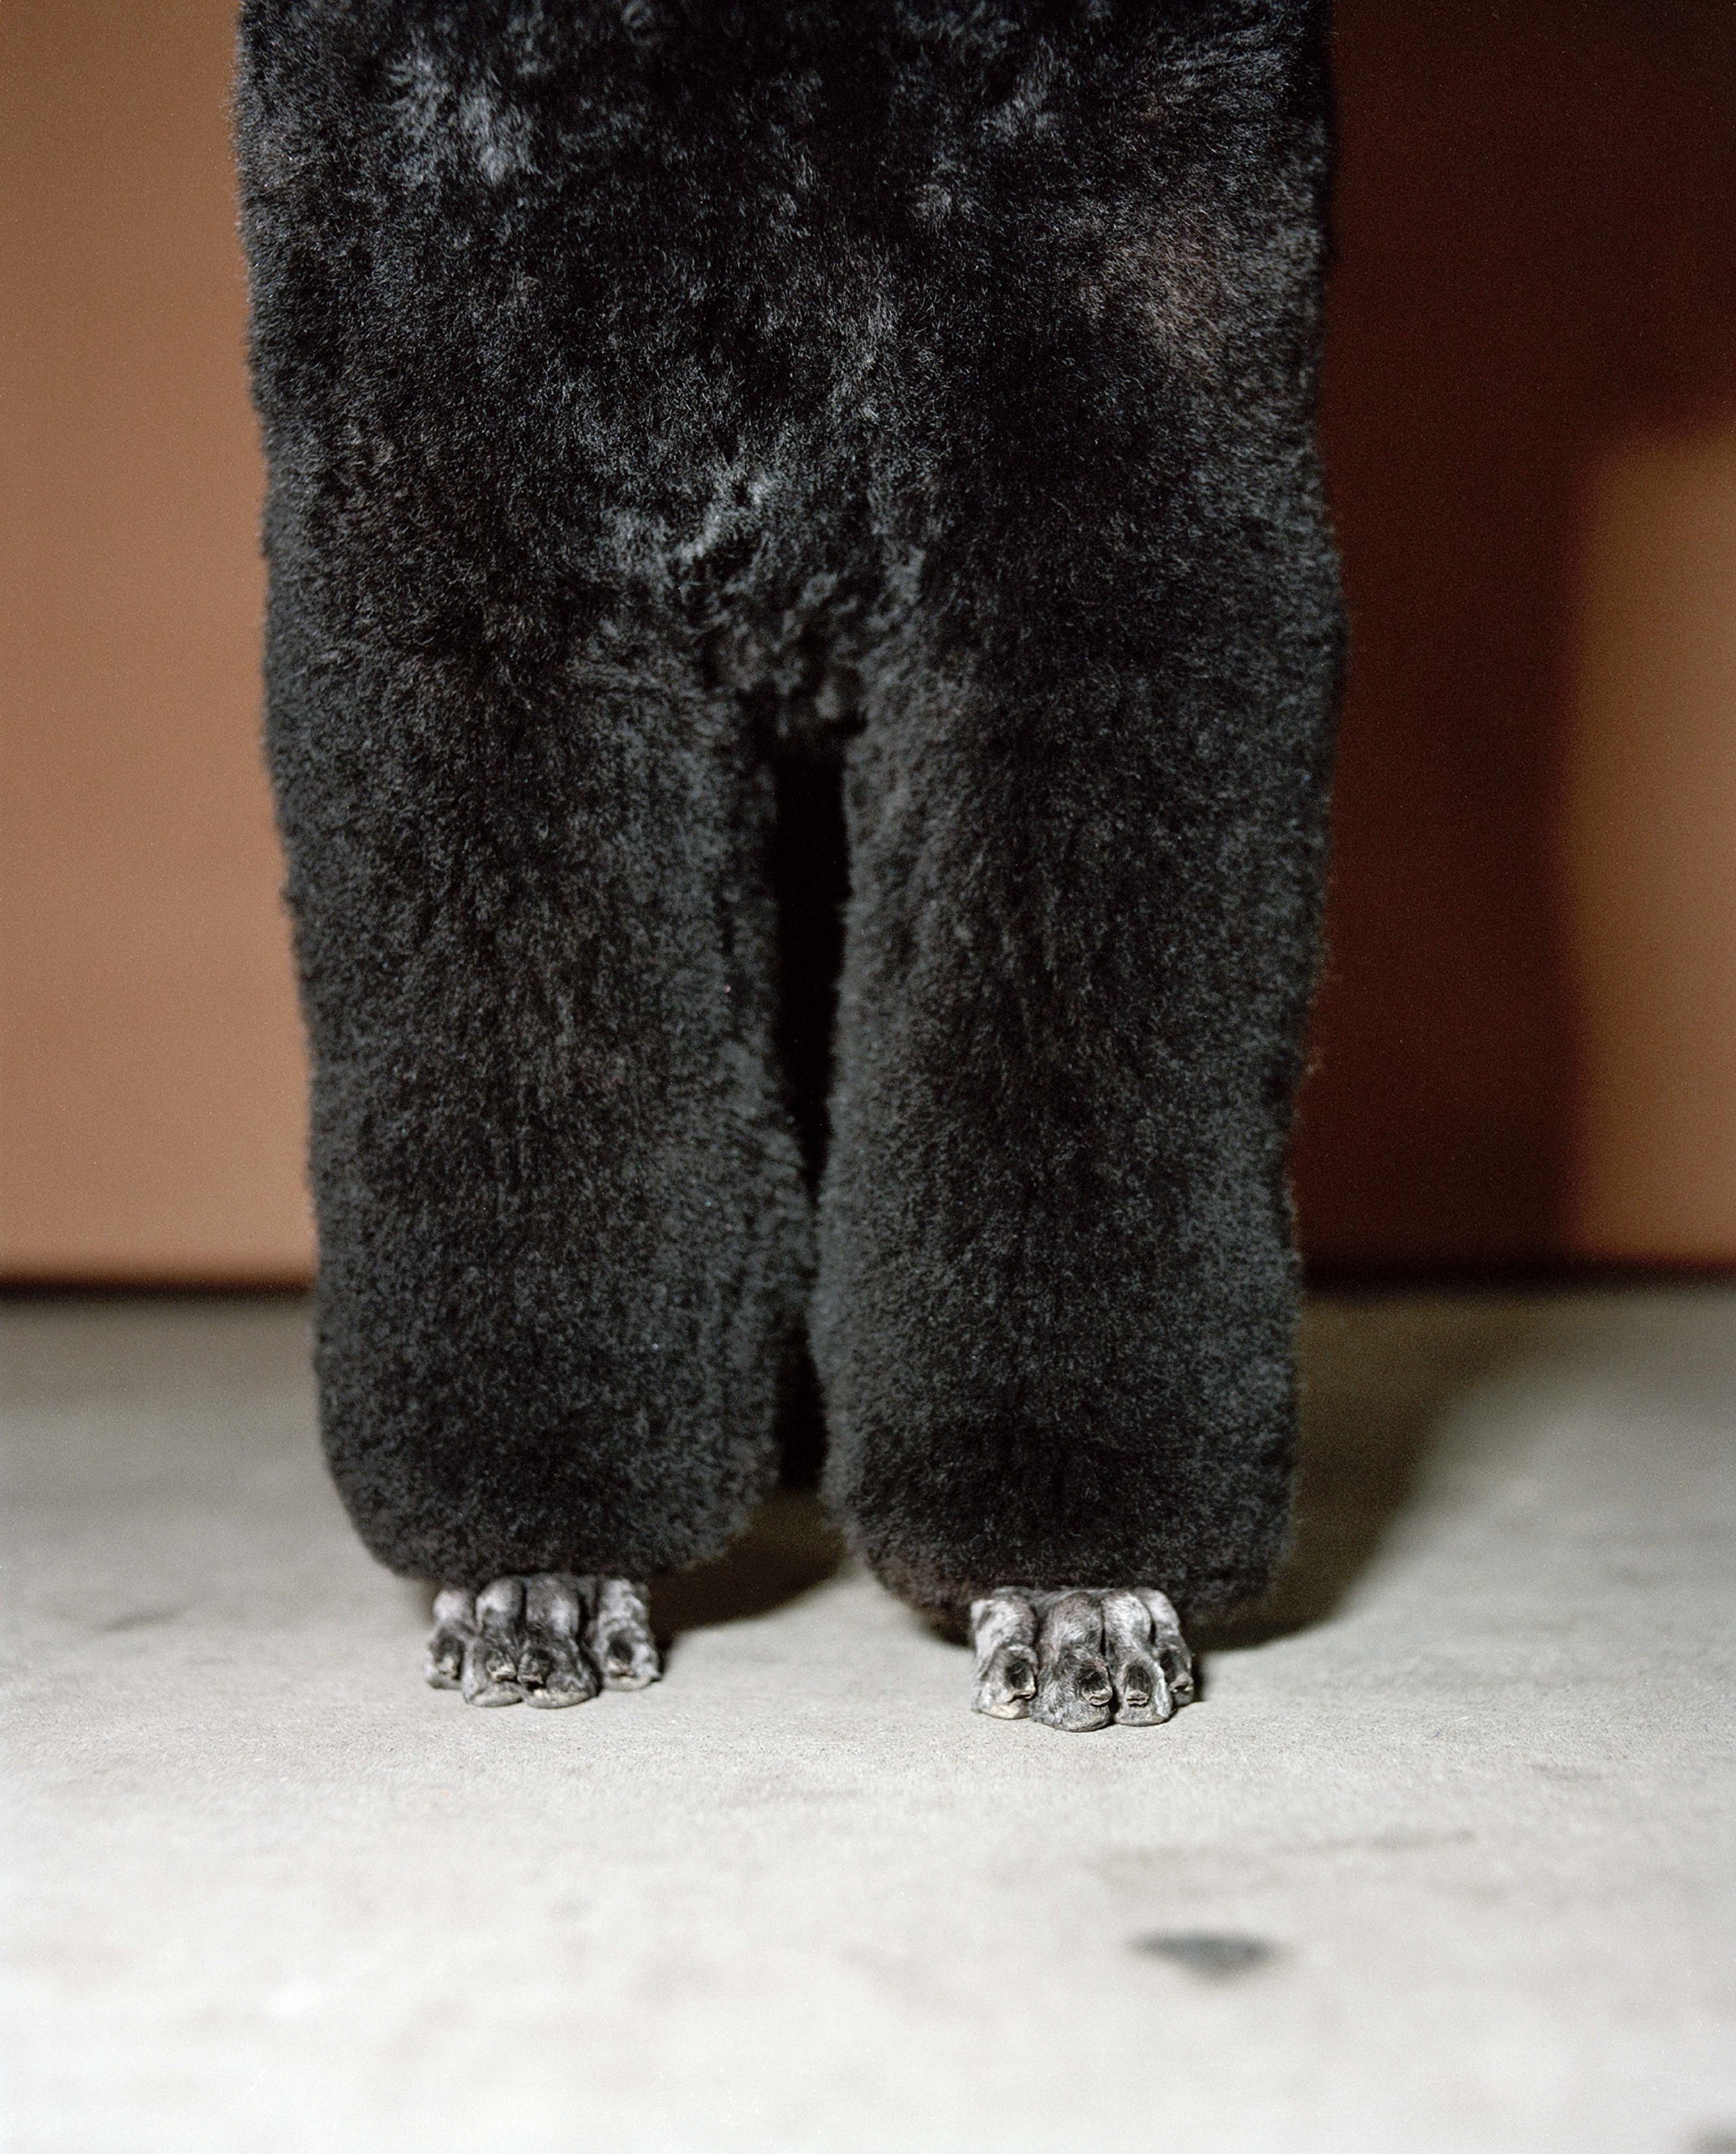 legs of a poodle